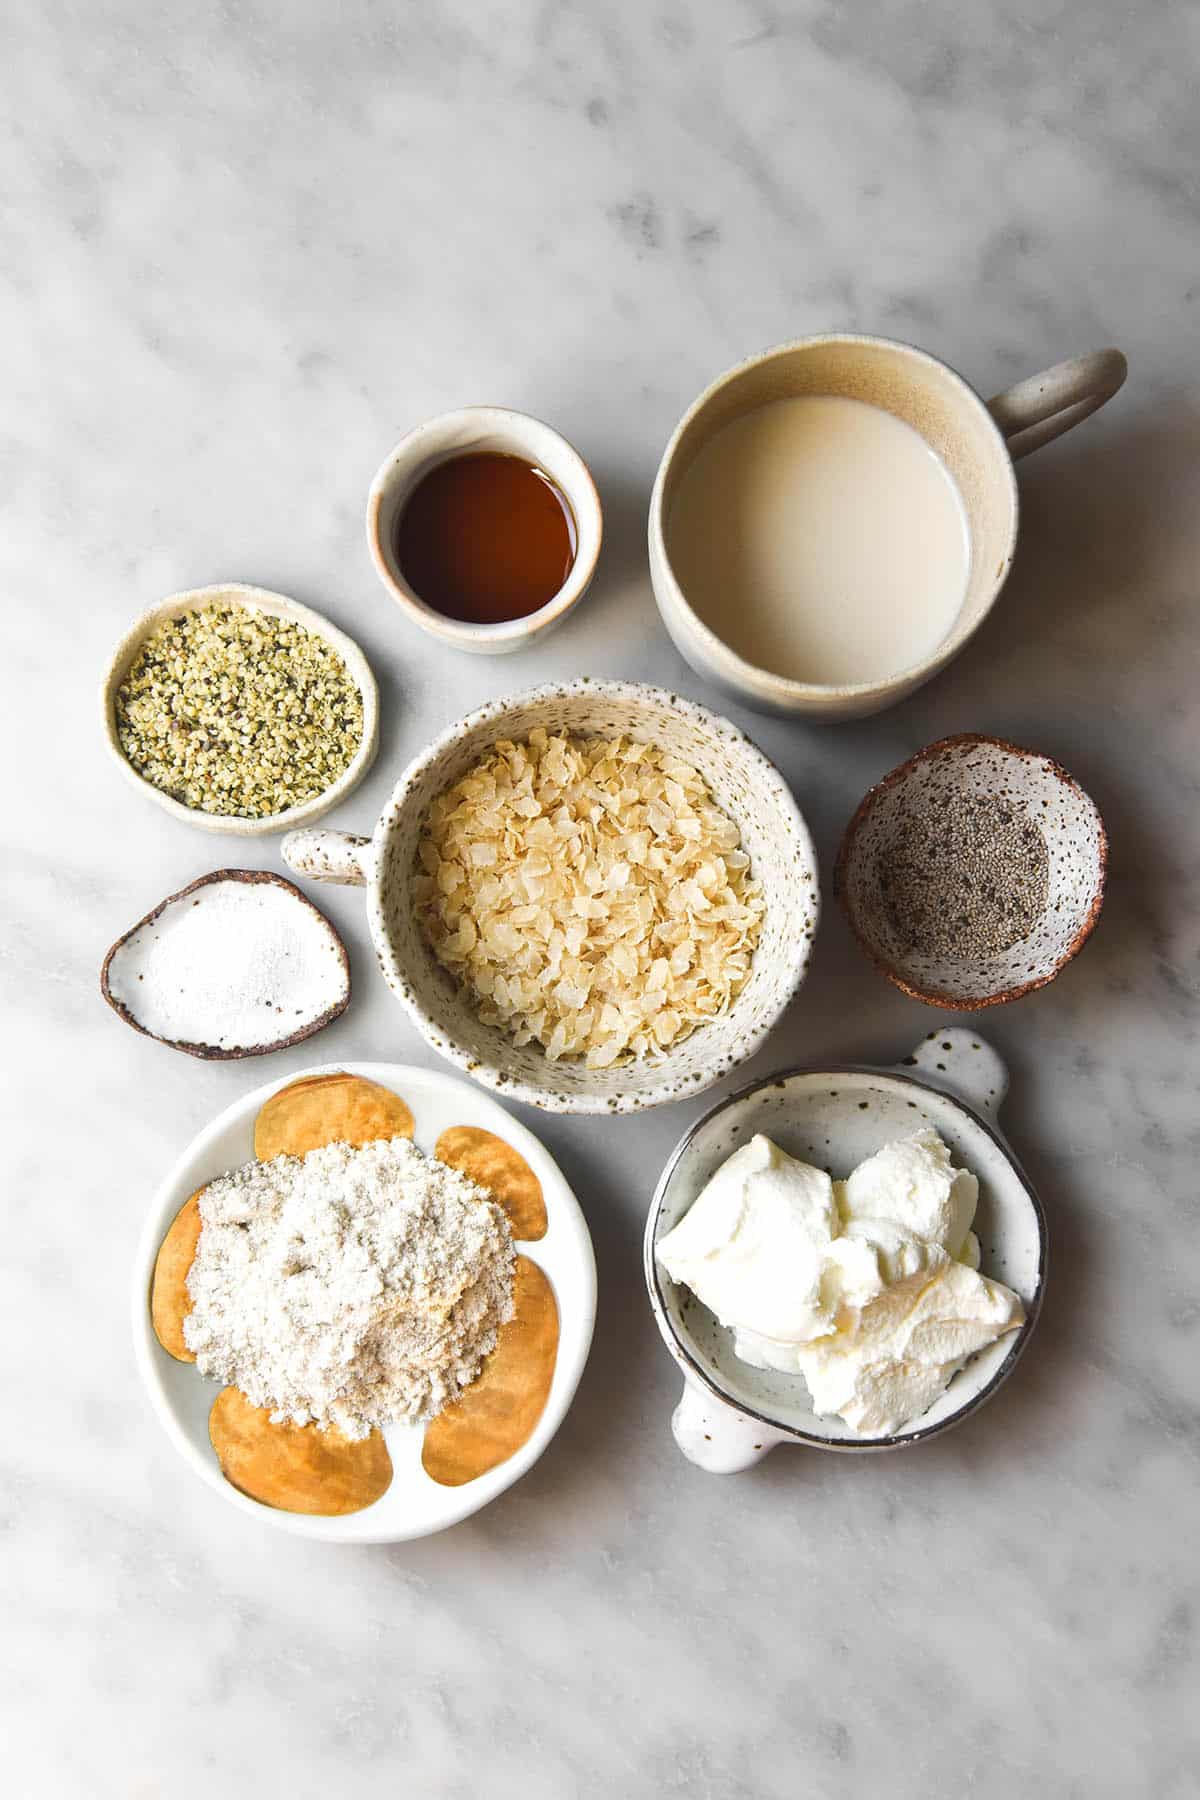 An aerial image of the ingredients for gluten free overnight oats grouped in small white ceramic bowls on a white marble table